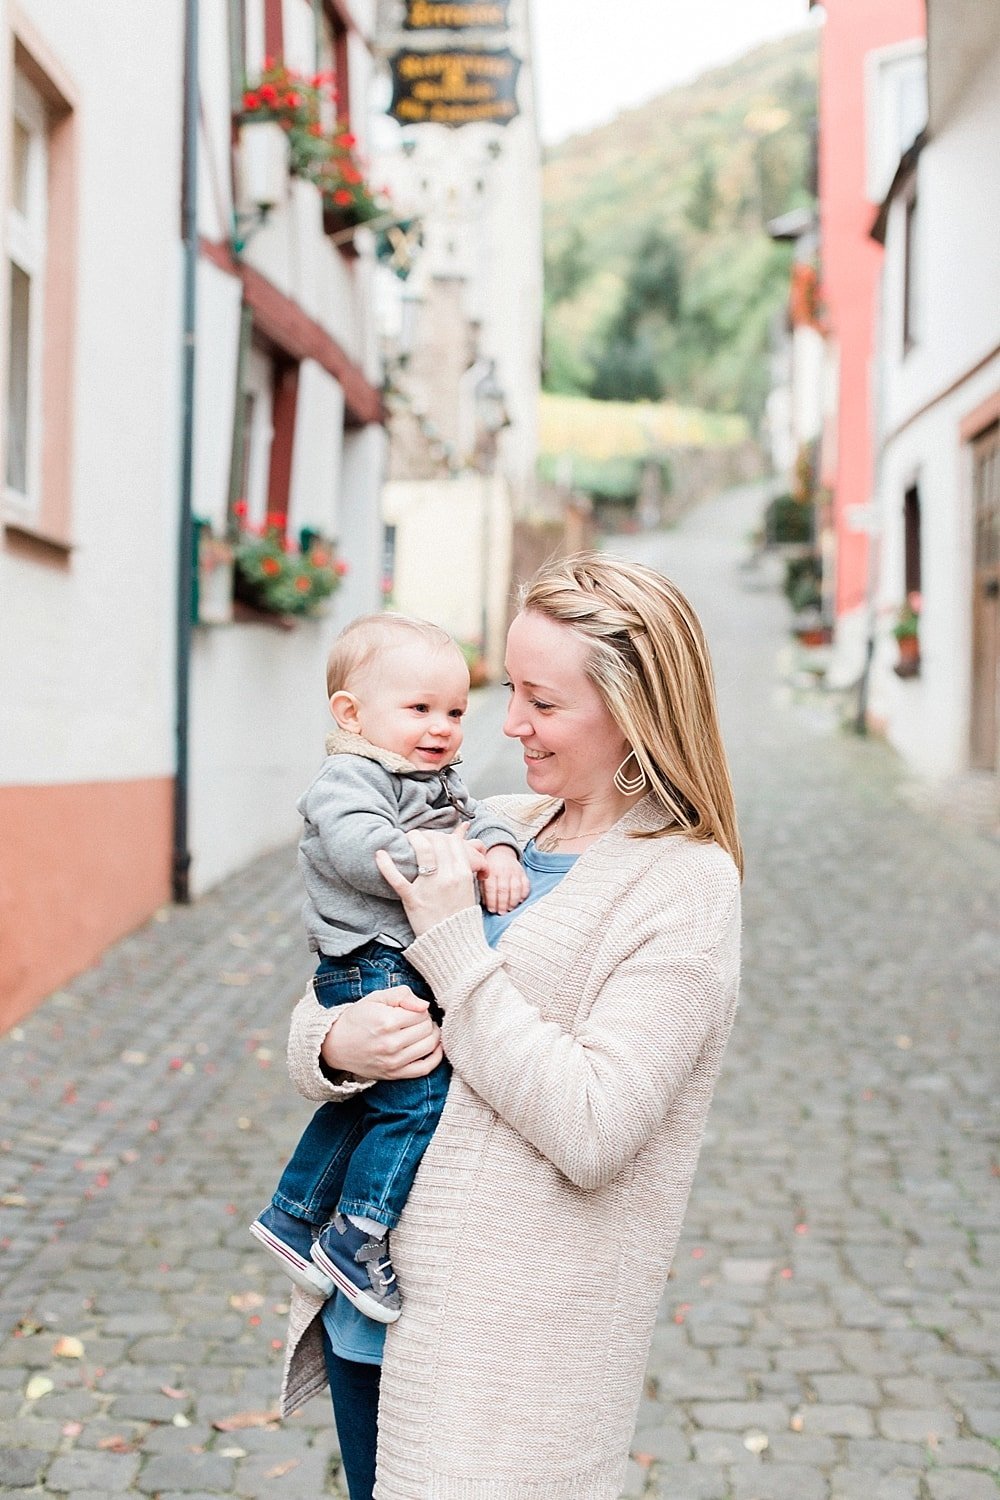 Destination family session photographed in Bernkastel, Germany by Alicia Yarrish Photography